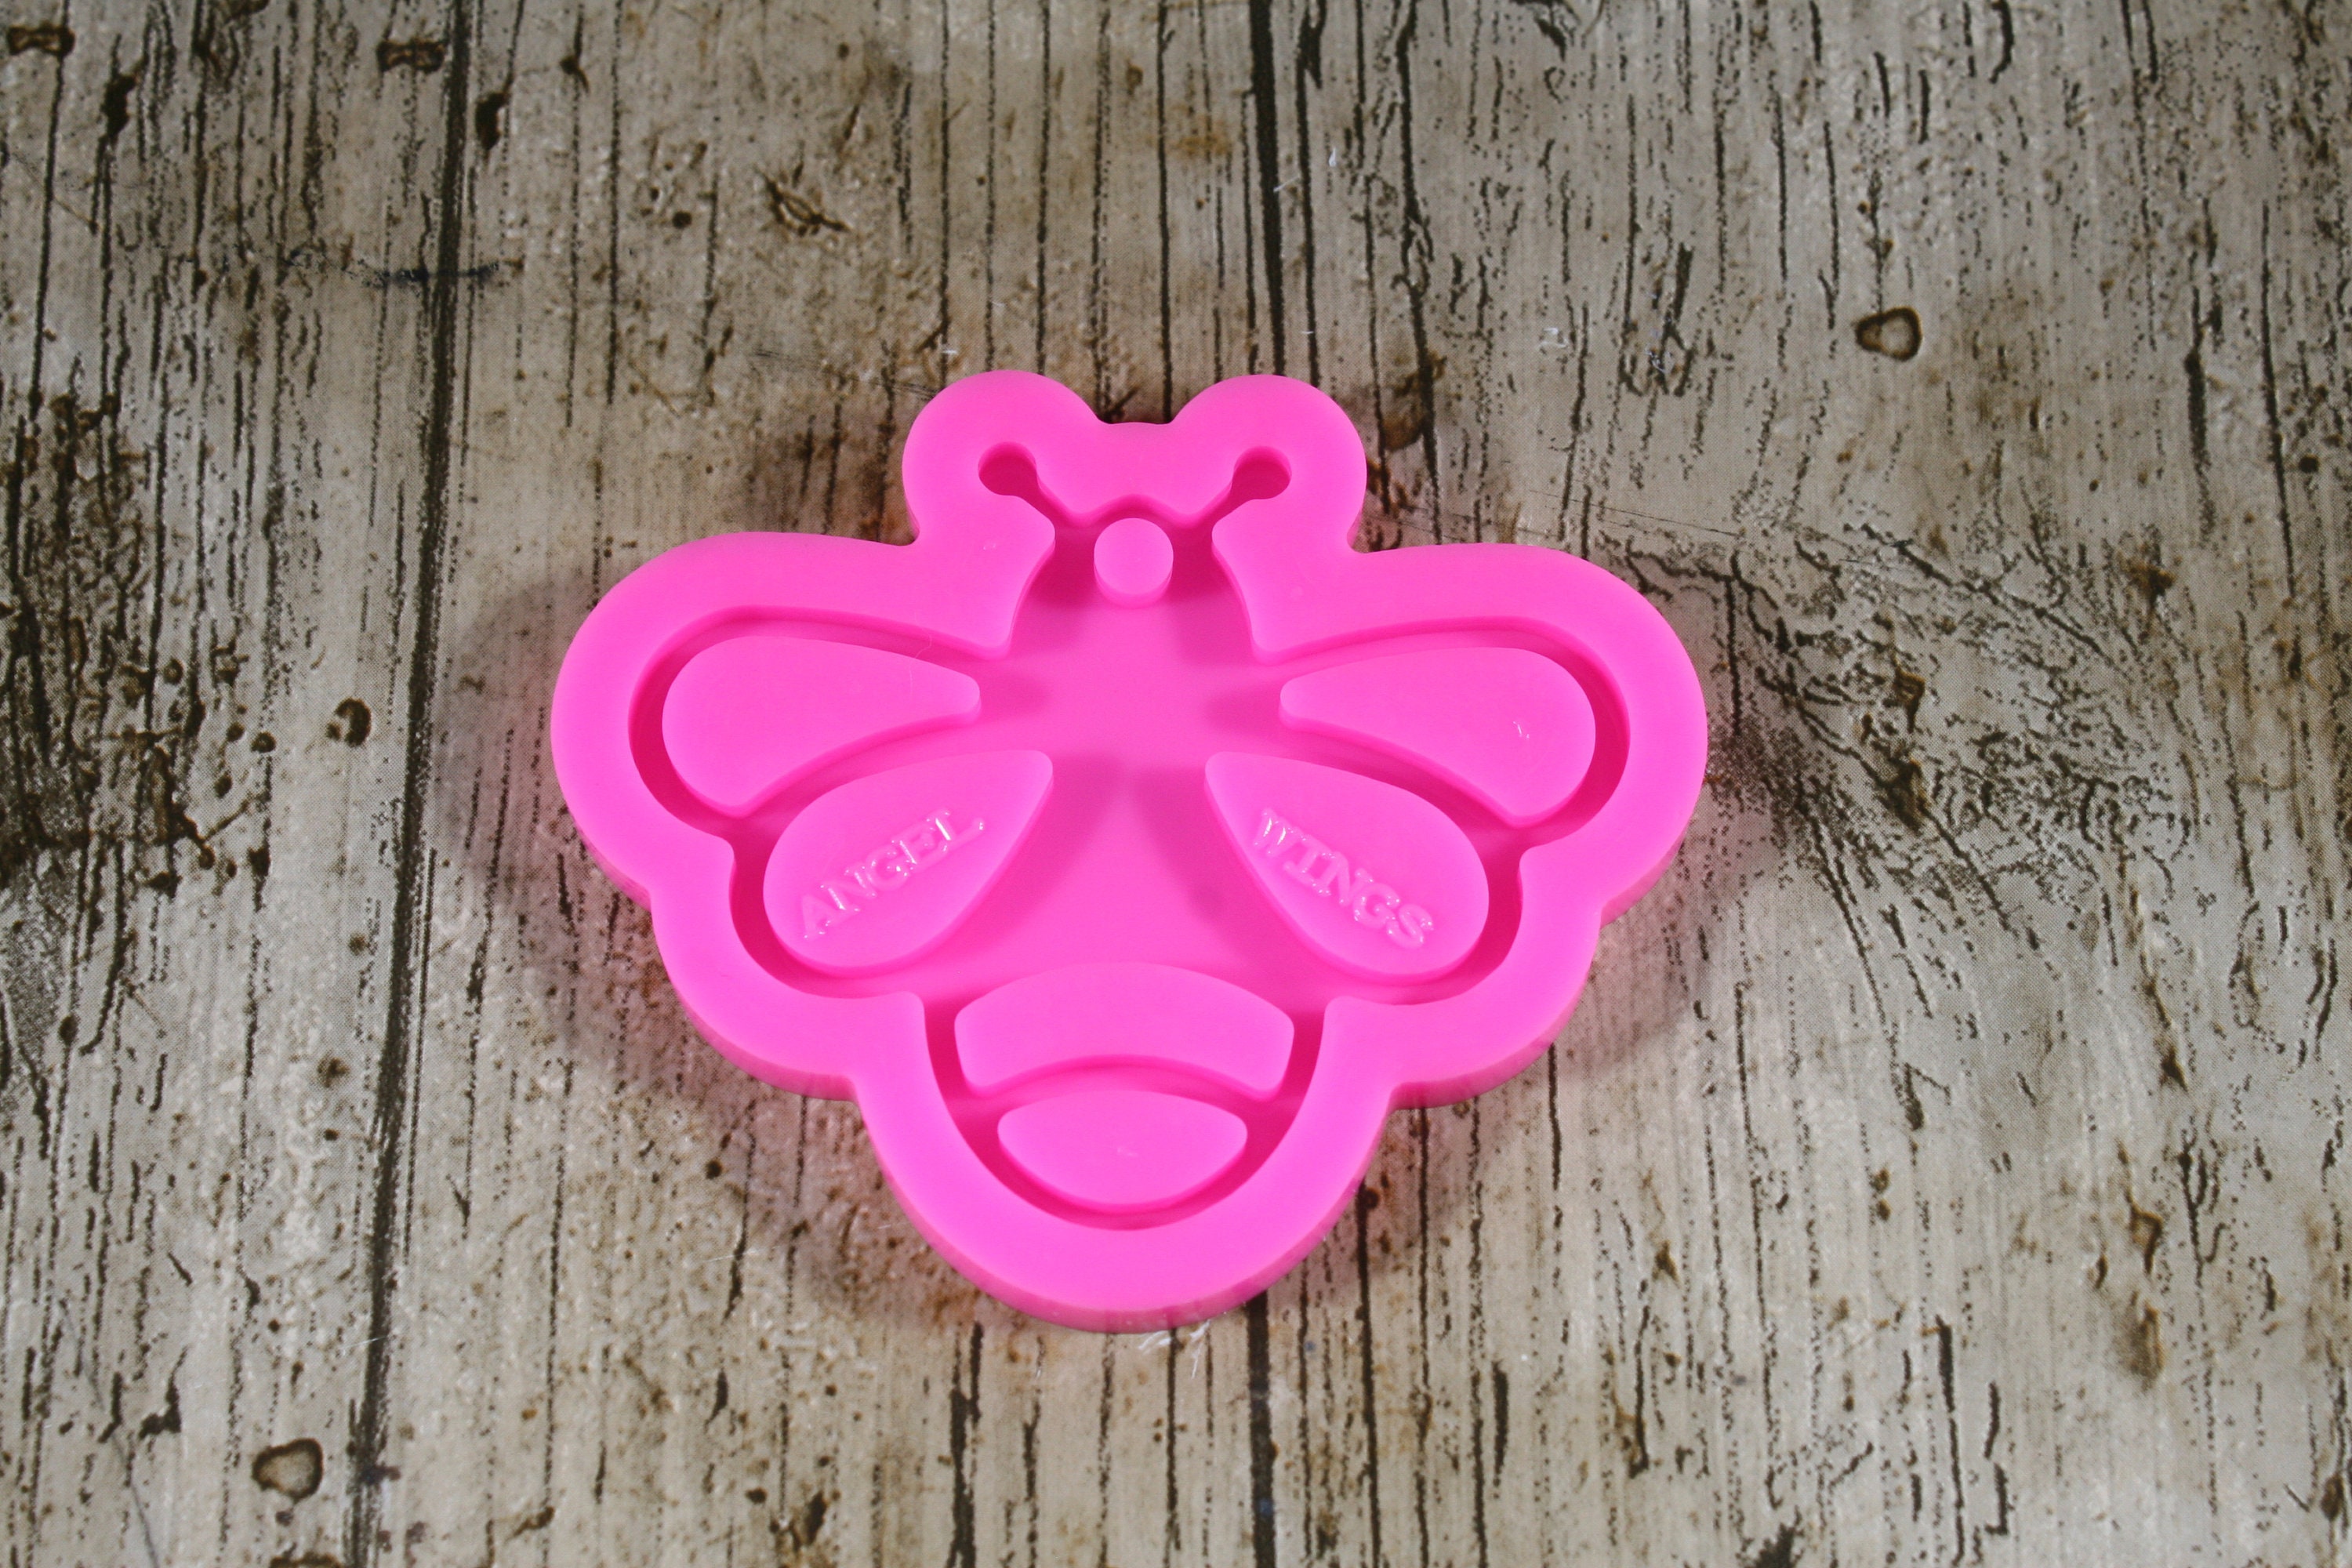 Angel Wings Super Glossy Bee Honeycomb Shape Keychain Silicone Mold Resin Craft Silicone Mould DIY Necklace Pendant Jewellery Making Mold